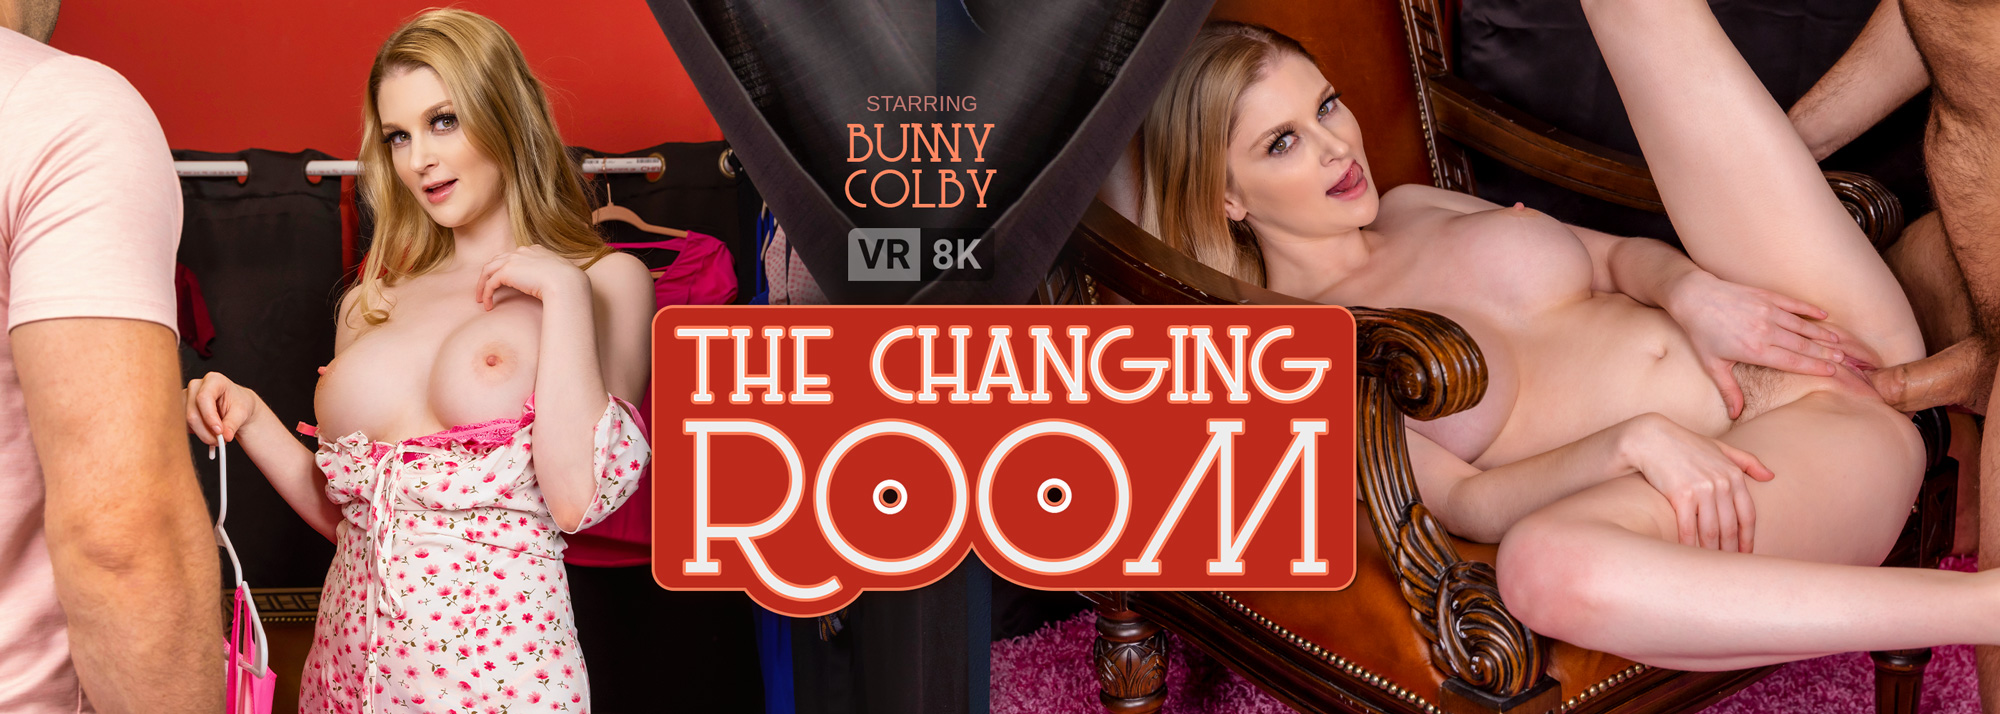 The Changing Room with Bunny Colby  Slideshow